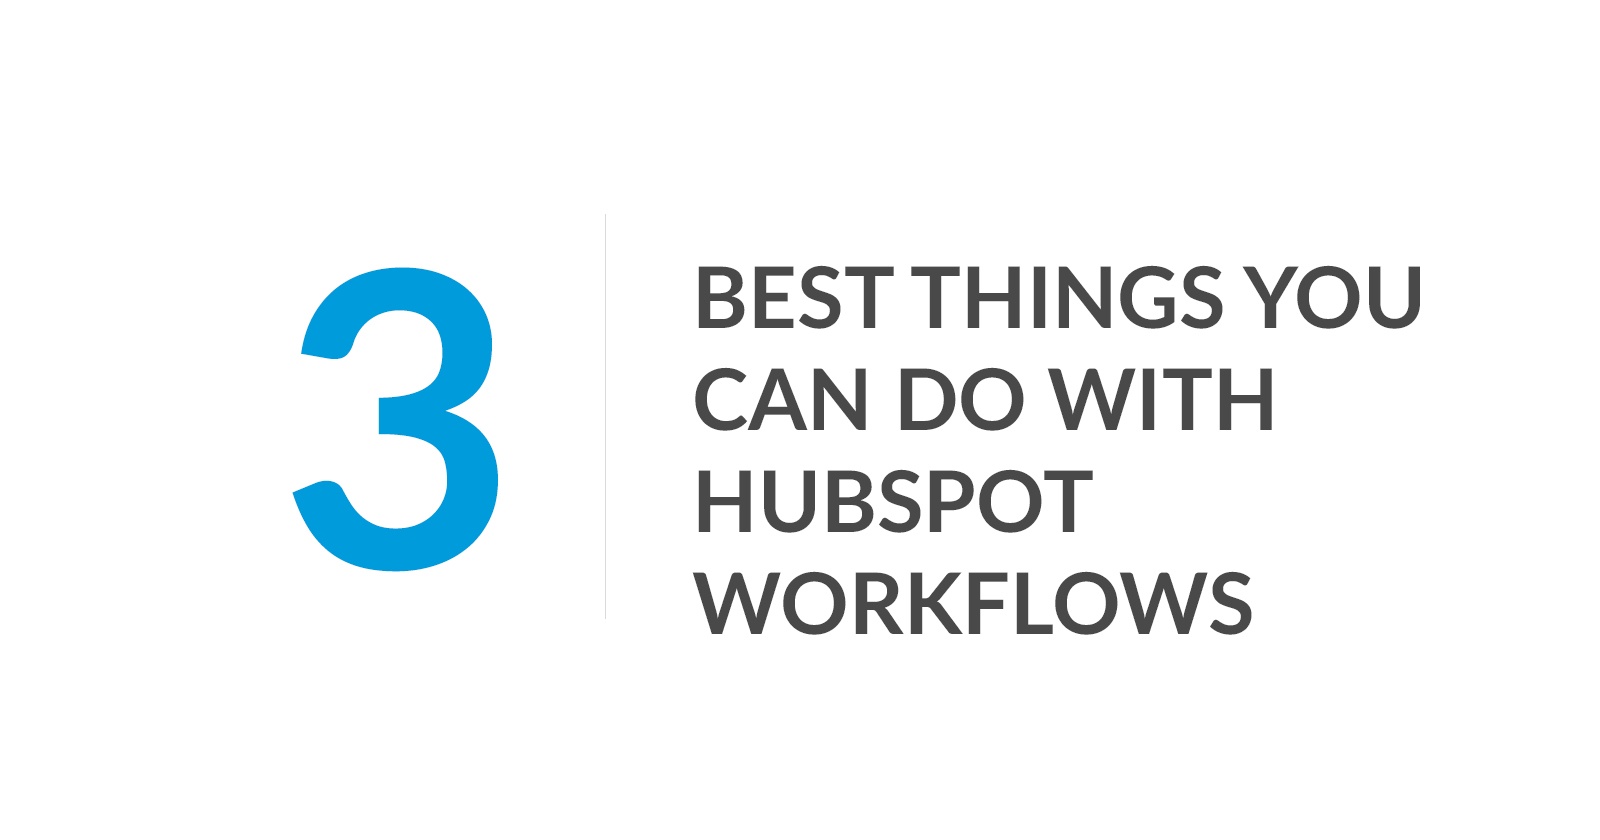 3-Best--Things-You-Can-Do-With-HubSpot-Workflows.jpg?noresize